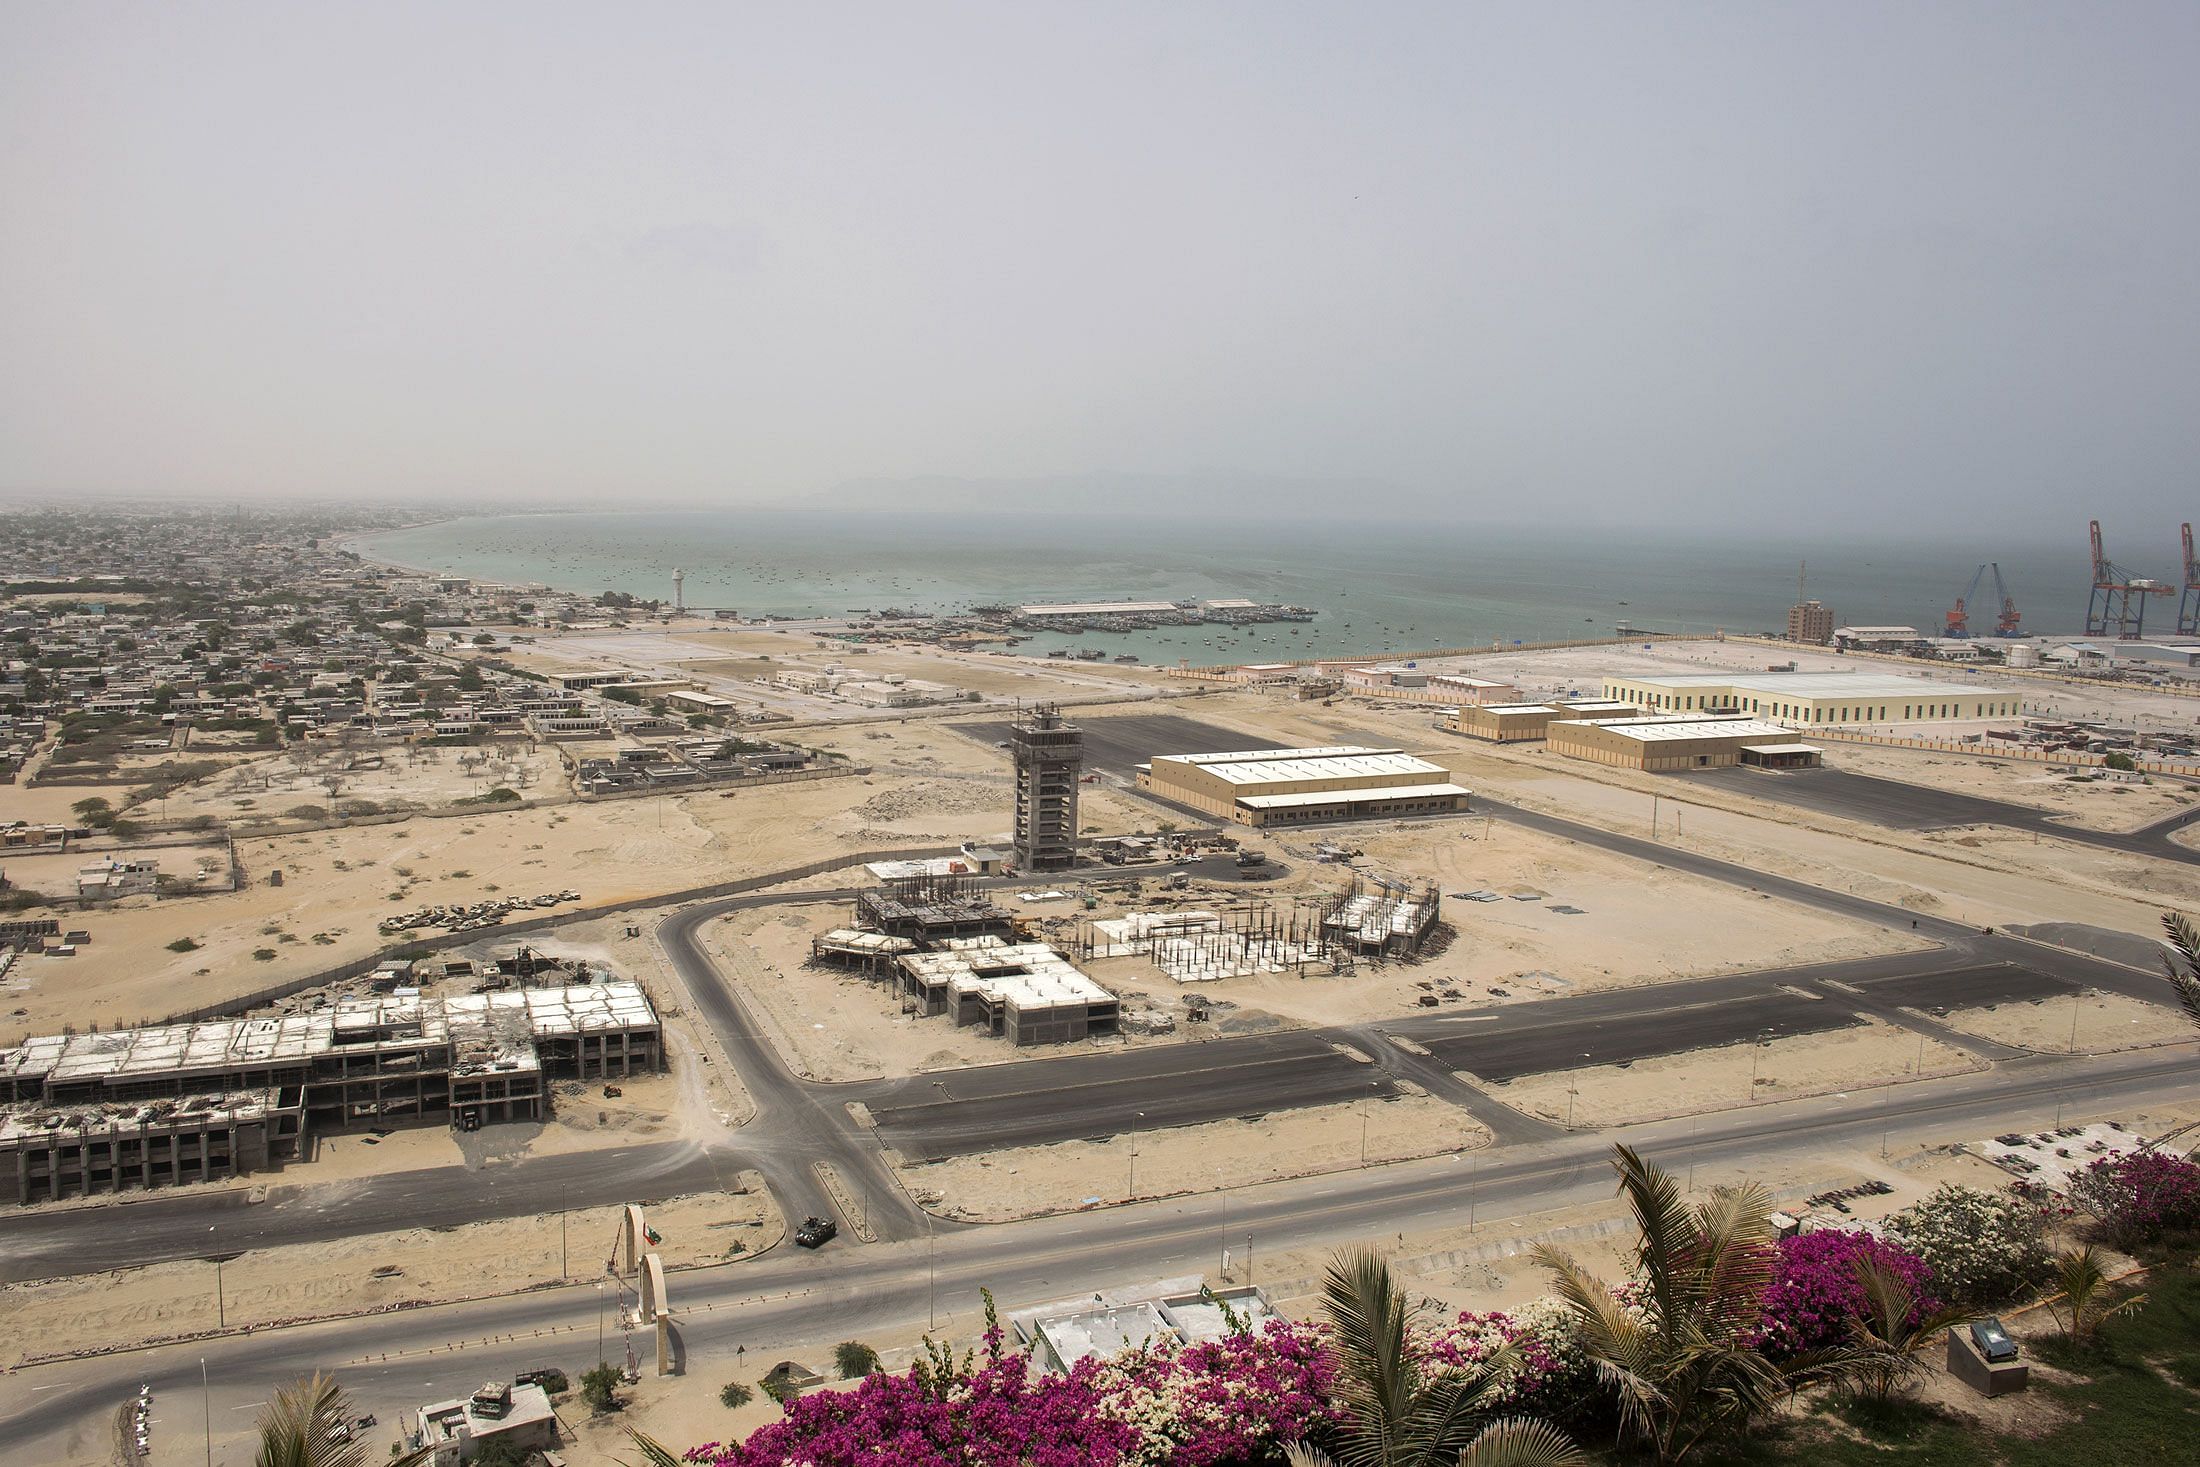 A development site near Gwadar Port, operated by China Overseas Ports Holding Co., in July 2018 | Photo: Asim Hafeez | Bloomberg